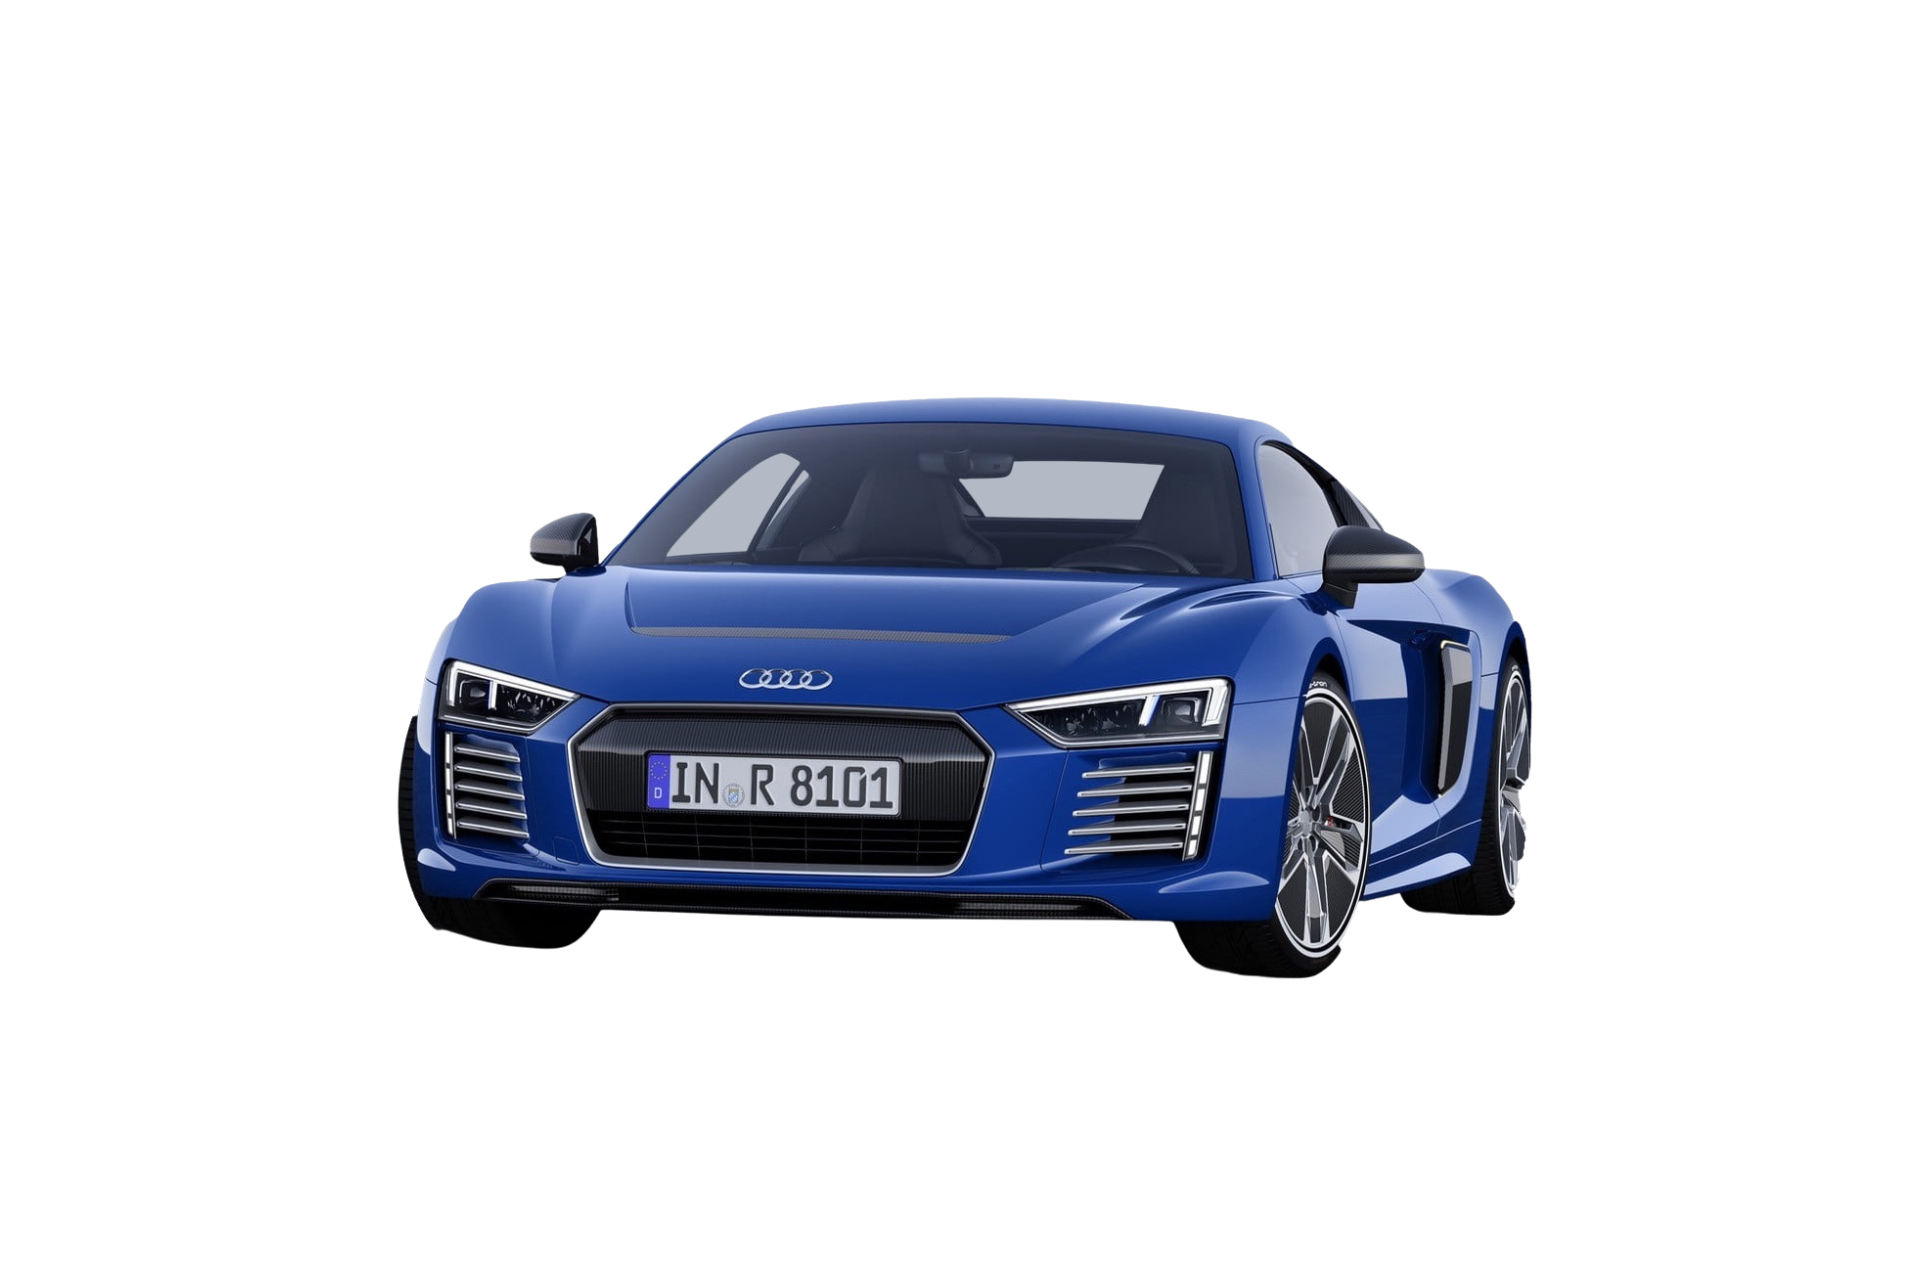 Charging your Audi R8 e-tron